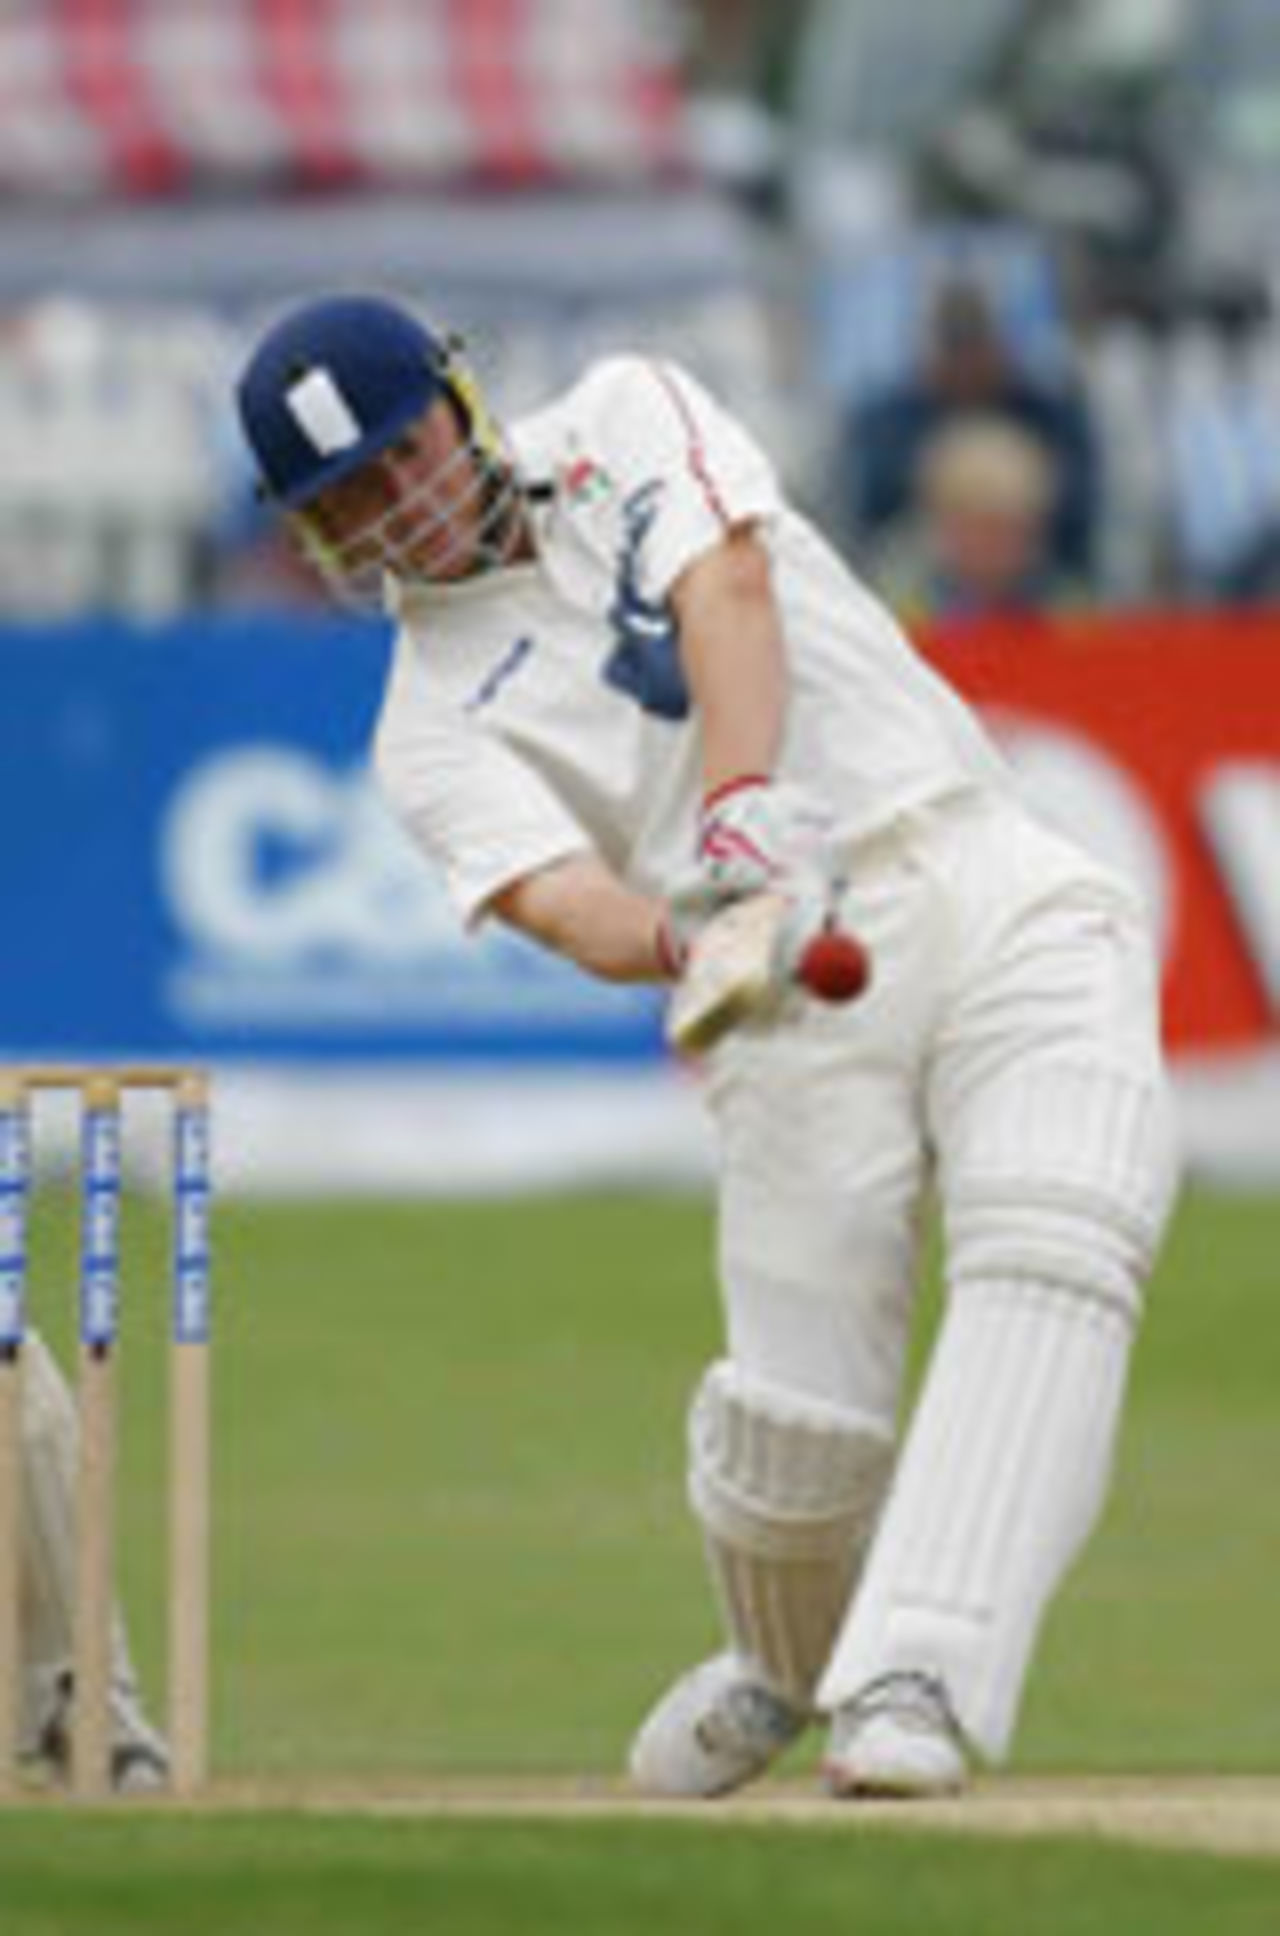 Andrew Flintoff batting for Lancashire v Sussex, Hove, May 29, 2004